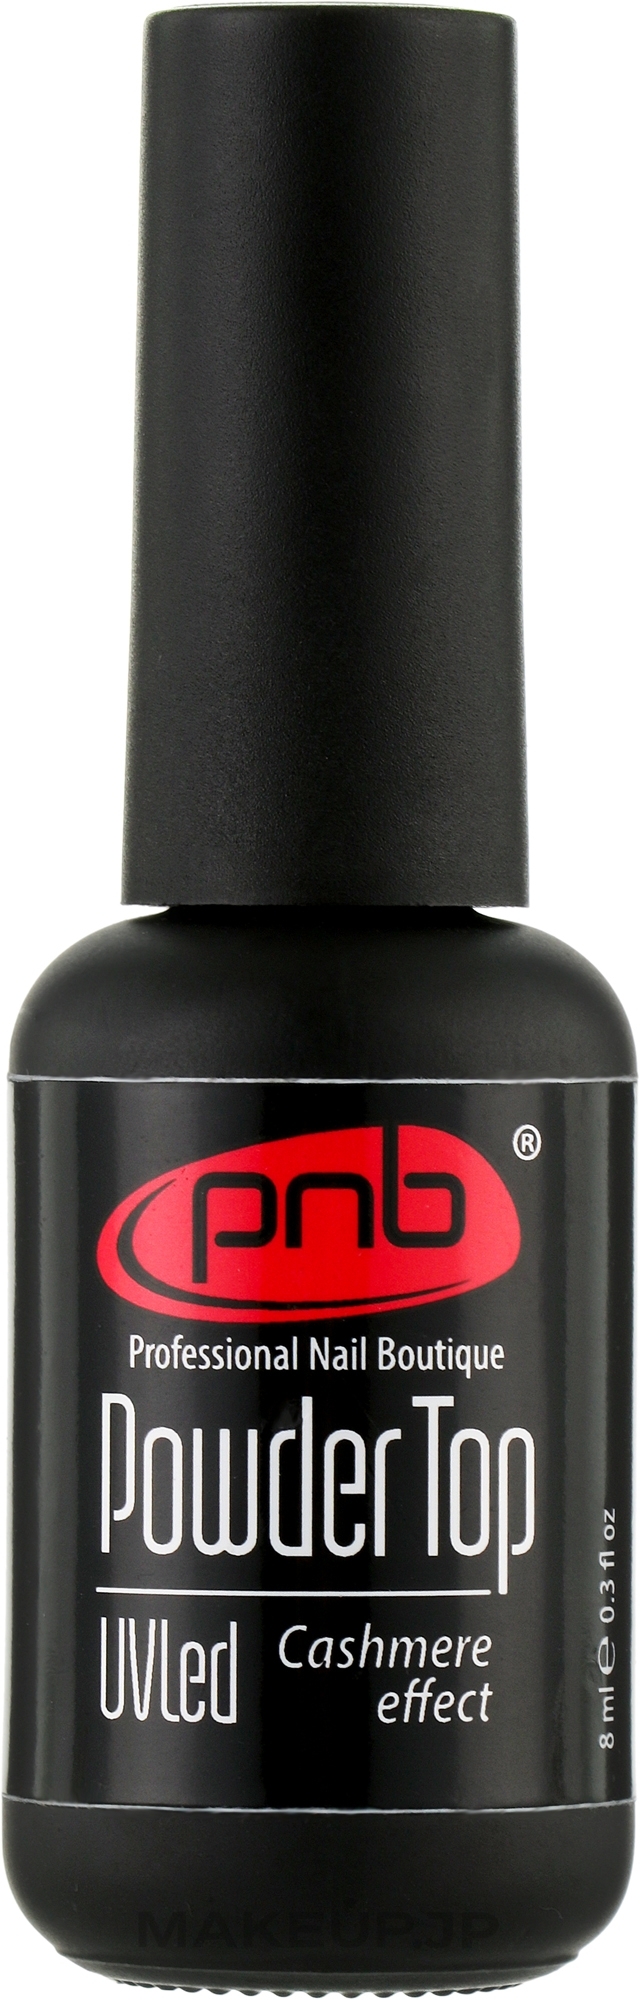 Extra Long-Lasting Matte Top Coat with Cashmere Effect - PNB UV/LED Powder Top Cashmere Effect — photo 8 ml